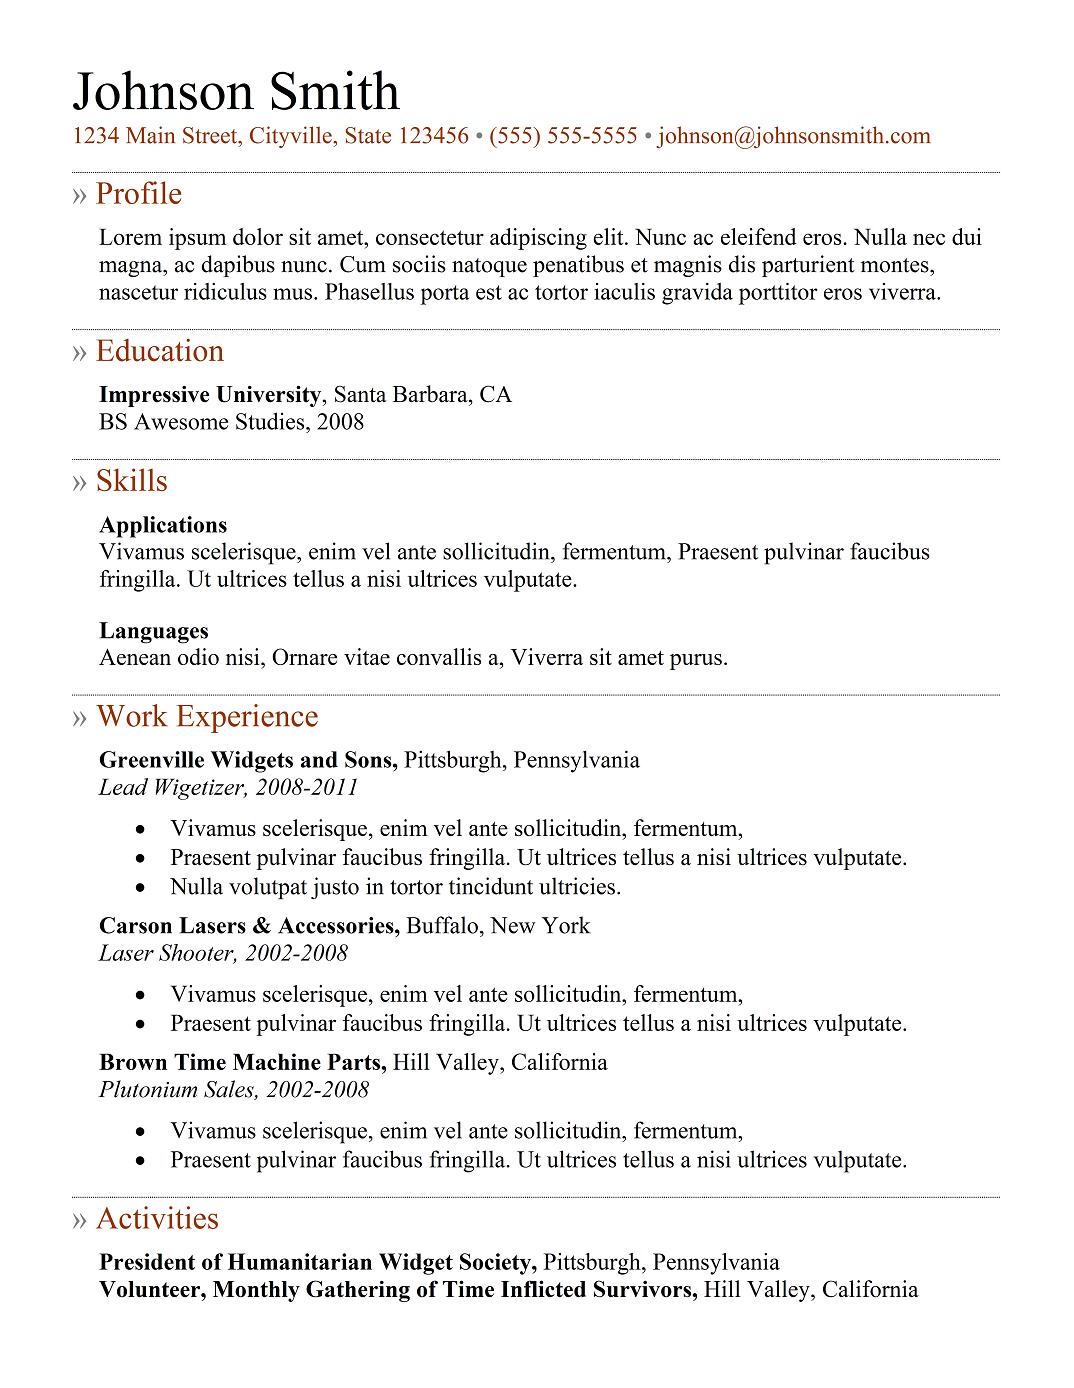 how to prepare a curriculum vitae templates free download